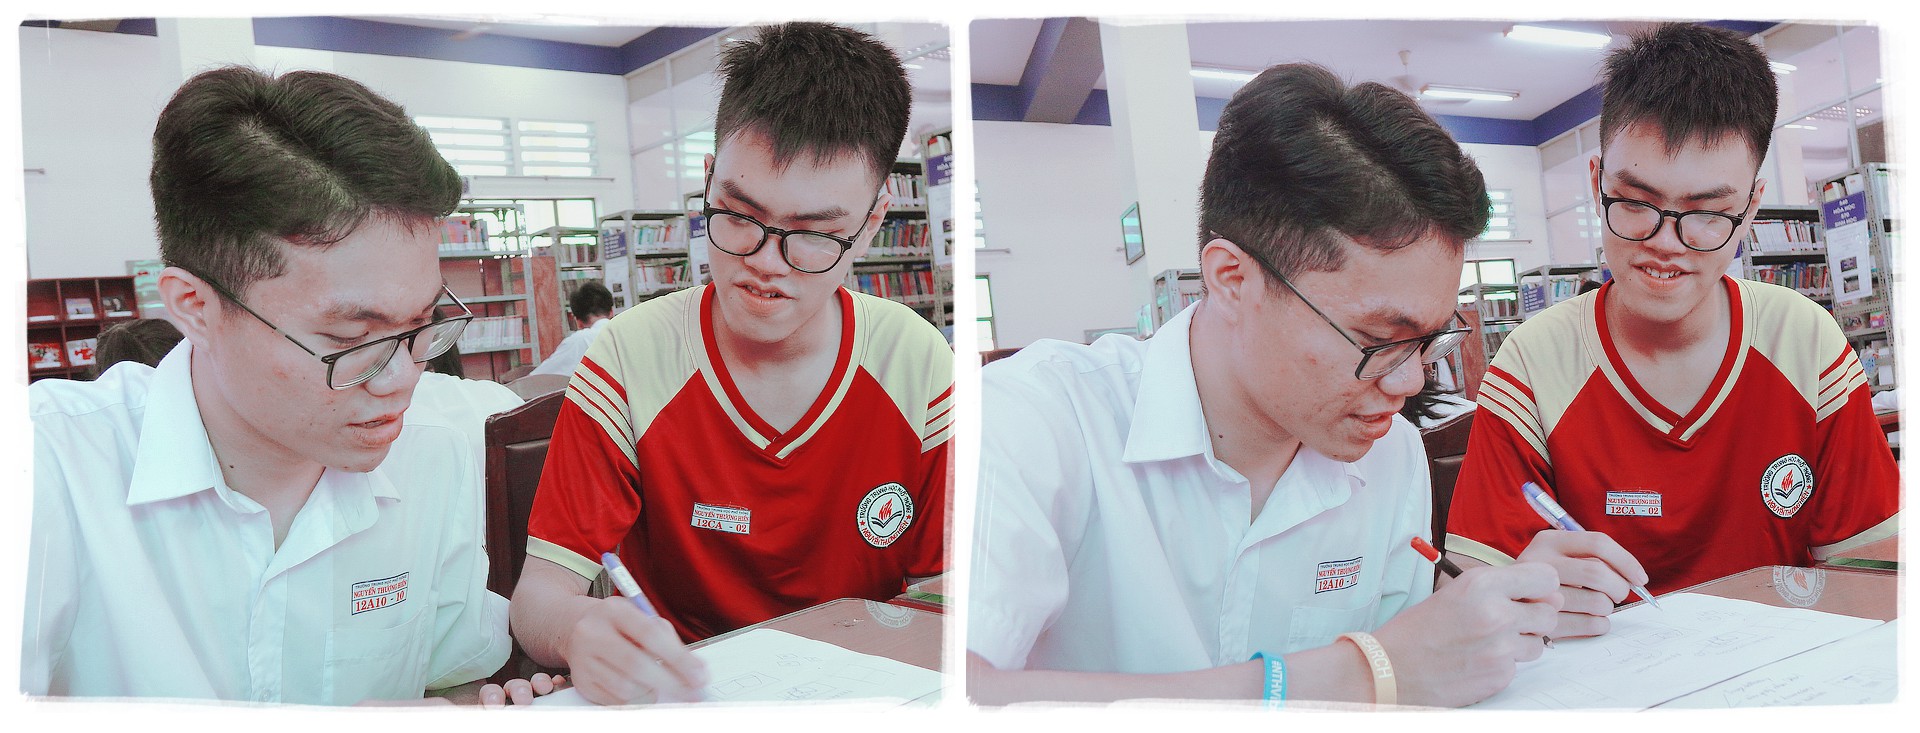 Doan Nguyen Phuong Danh (red) studies with a peer at Nguyen Thuong Hien High School in Ho Chi Minh City, Vietnam. Photo: Tuoi Tre